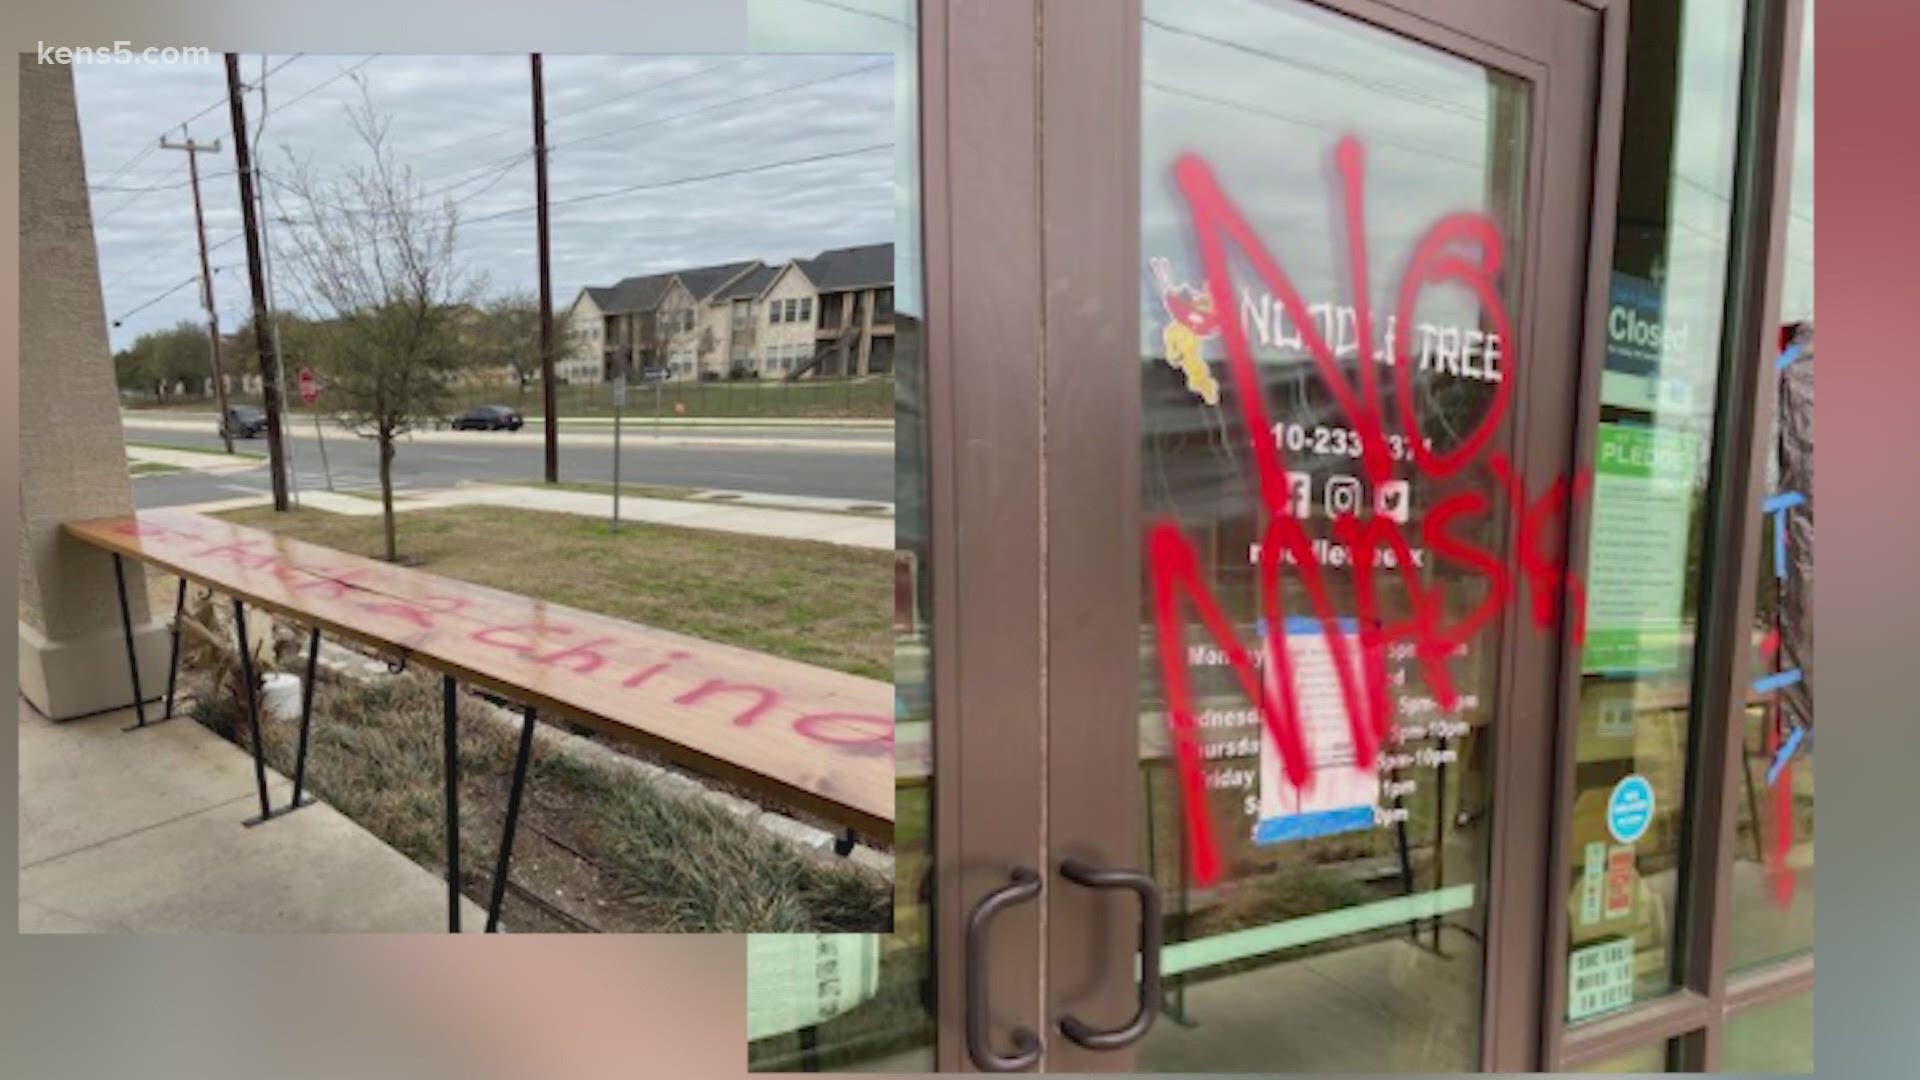 The San Antonio restaurant Noodle Tree tagged with racist, anti-Asian graffiti posted to Facebook saying they will not be opening until early April.